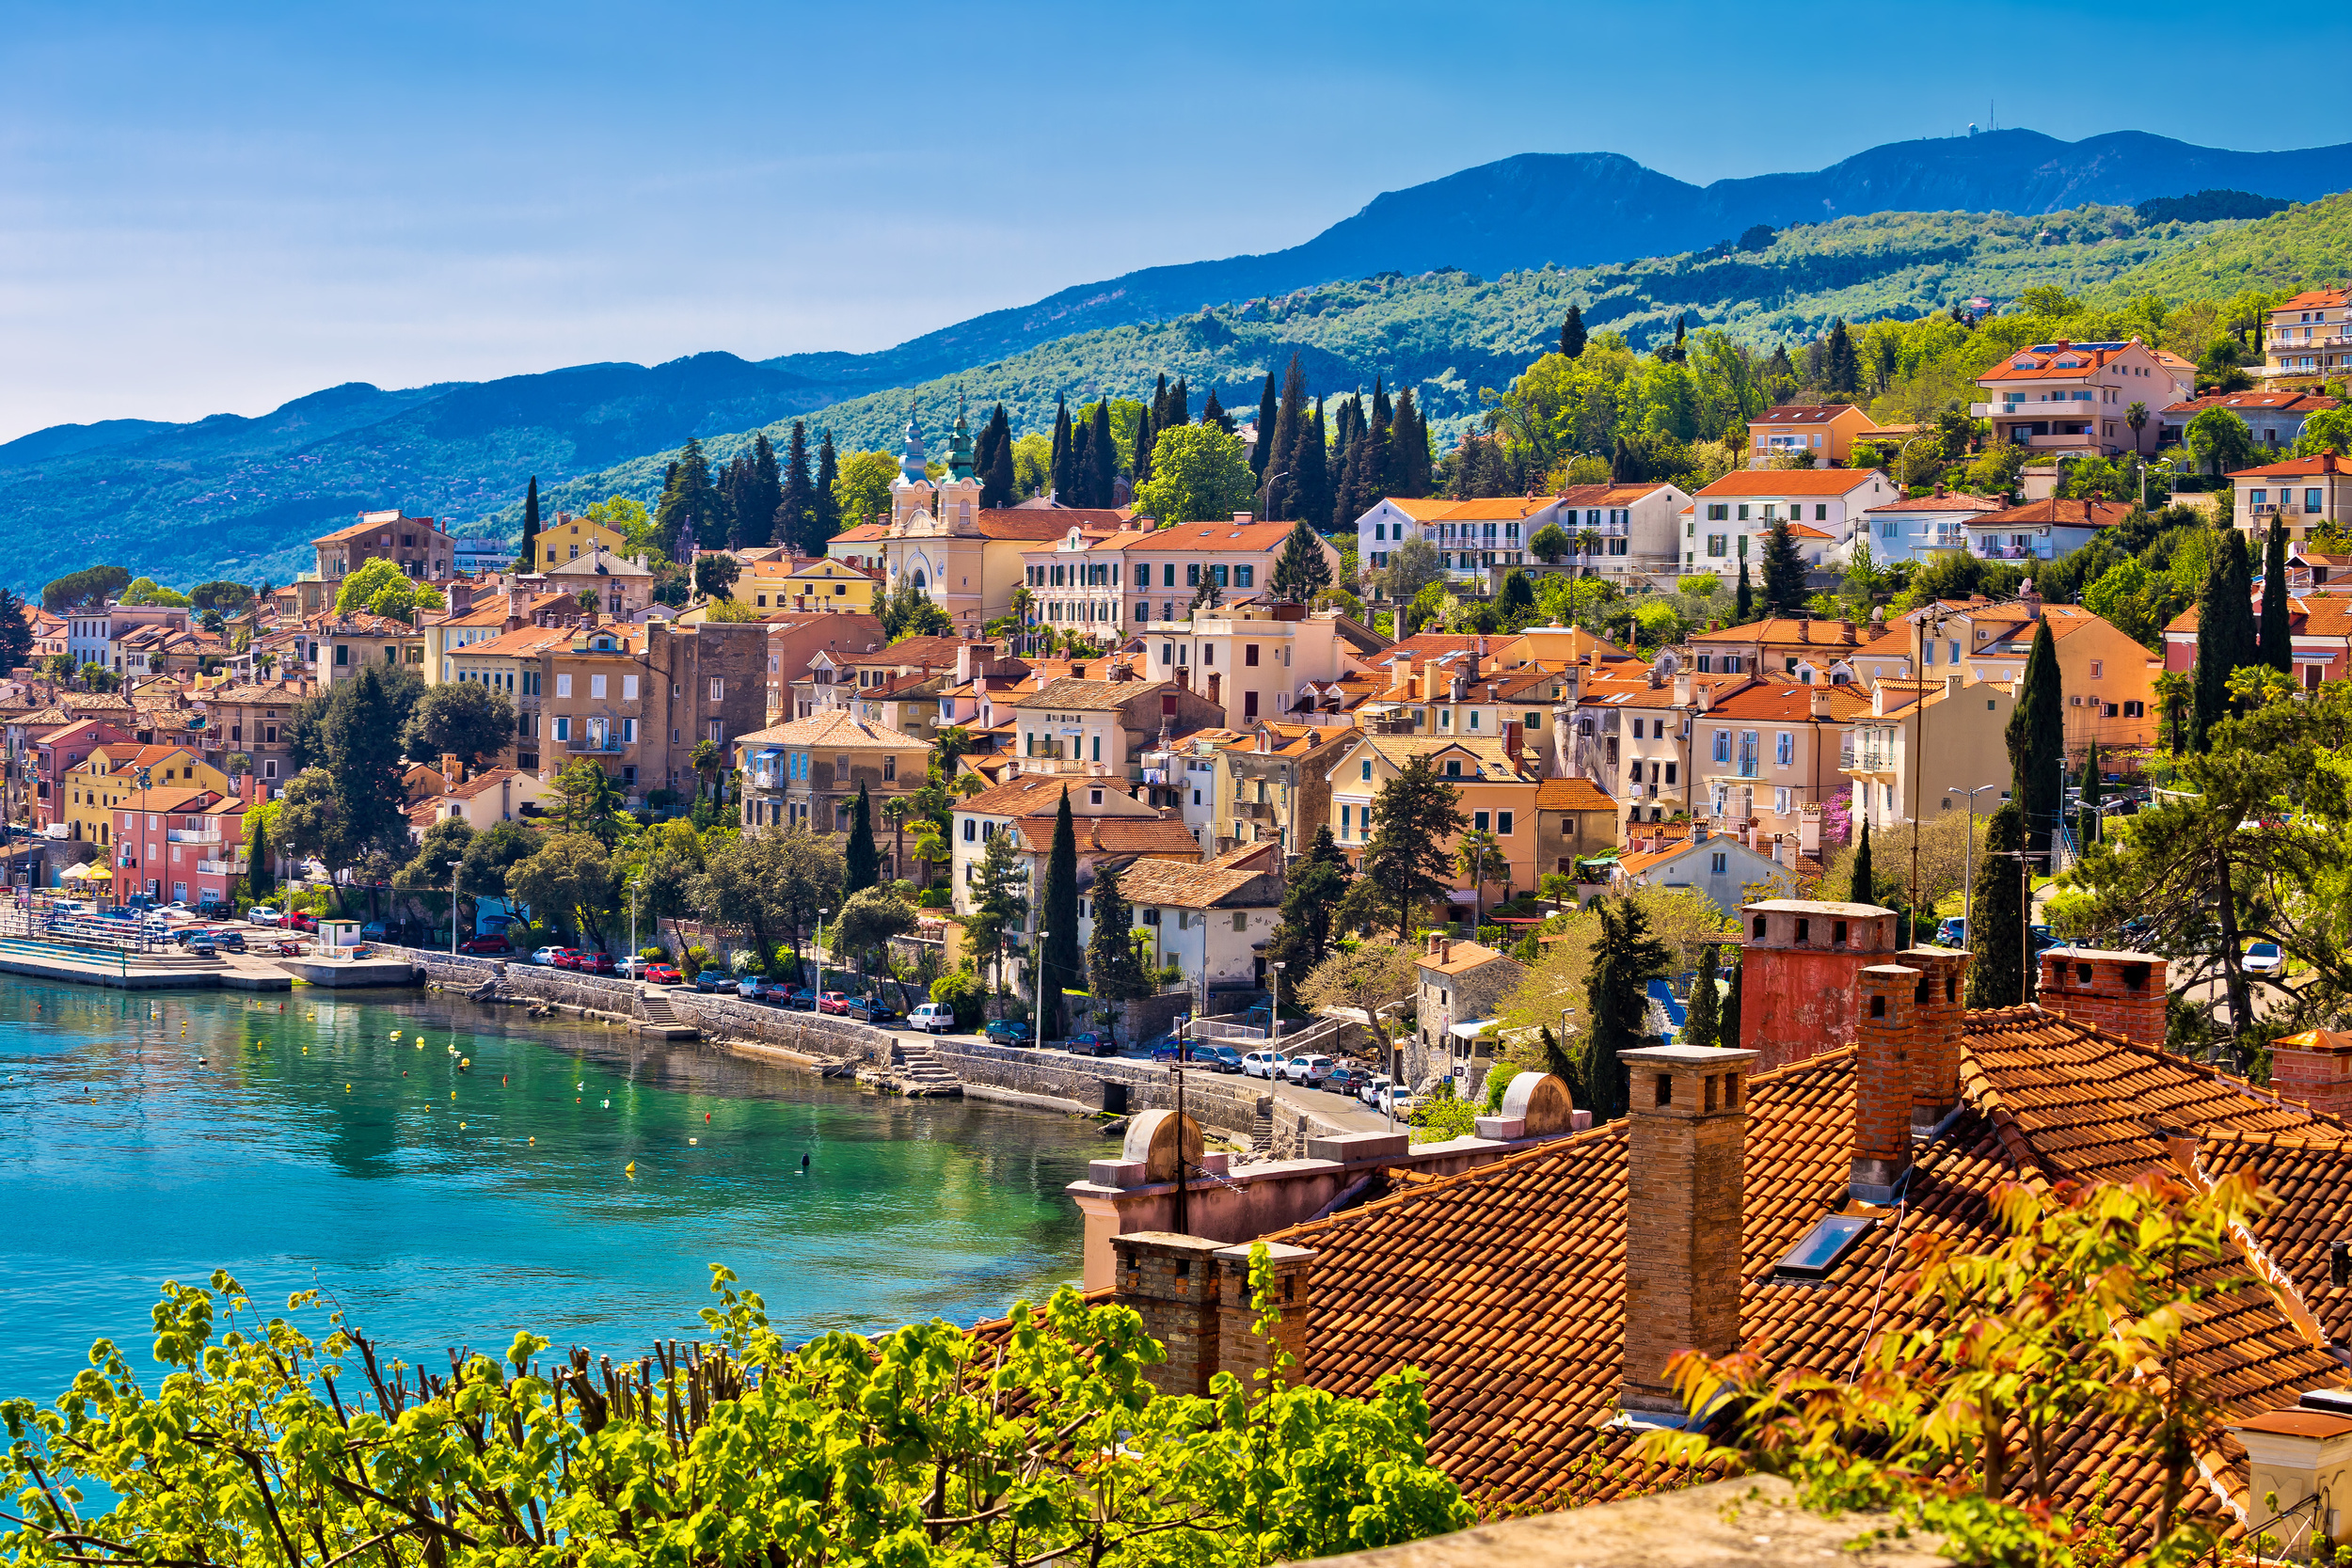 <p>Most popular among Austrian retirees, Opatija is absolutely worth a stop for wonderful food and views. It’s also home to a number of mansions from the Habsburg period — an interesting contrast to much of the coast. And, if you visit outside of peak season, you’ll likely have it all to yourself. </p><p>You may also like: <a href='https://www.yardbarker.com/lifestyle/articles/10_beautifully_scenic_walks_in_sydney/s1__38346409'>10 beautifully scenic walks in Sydney</a></p>